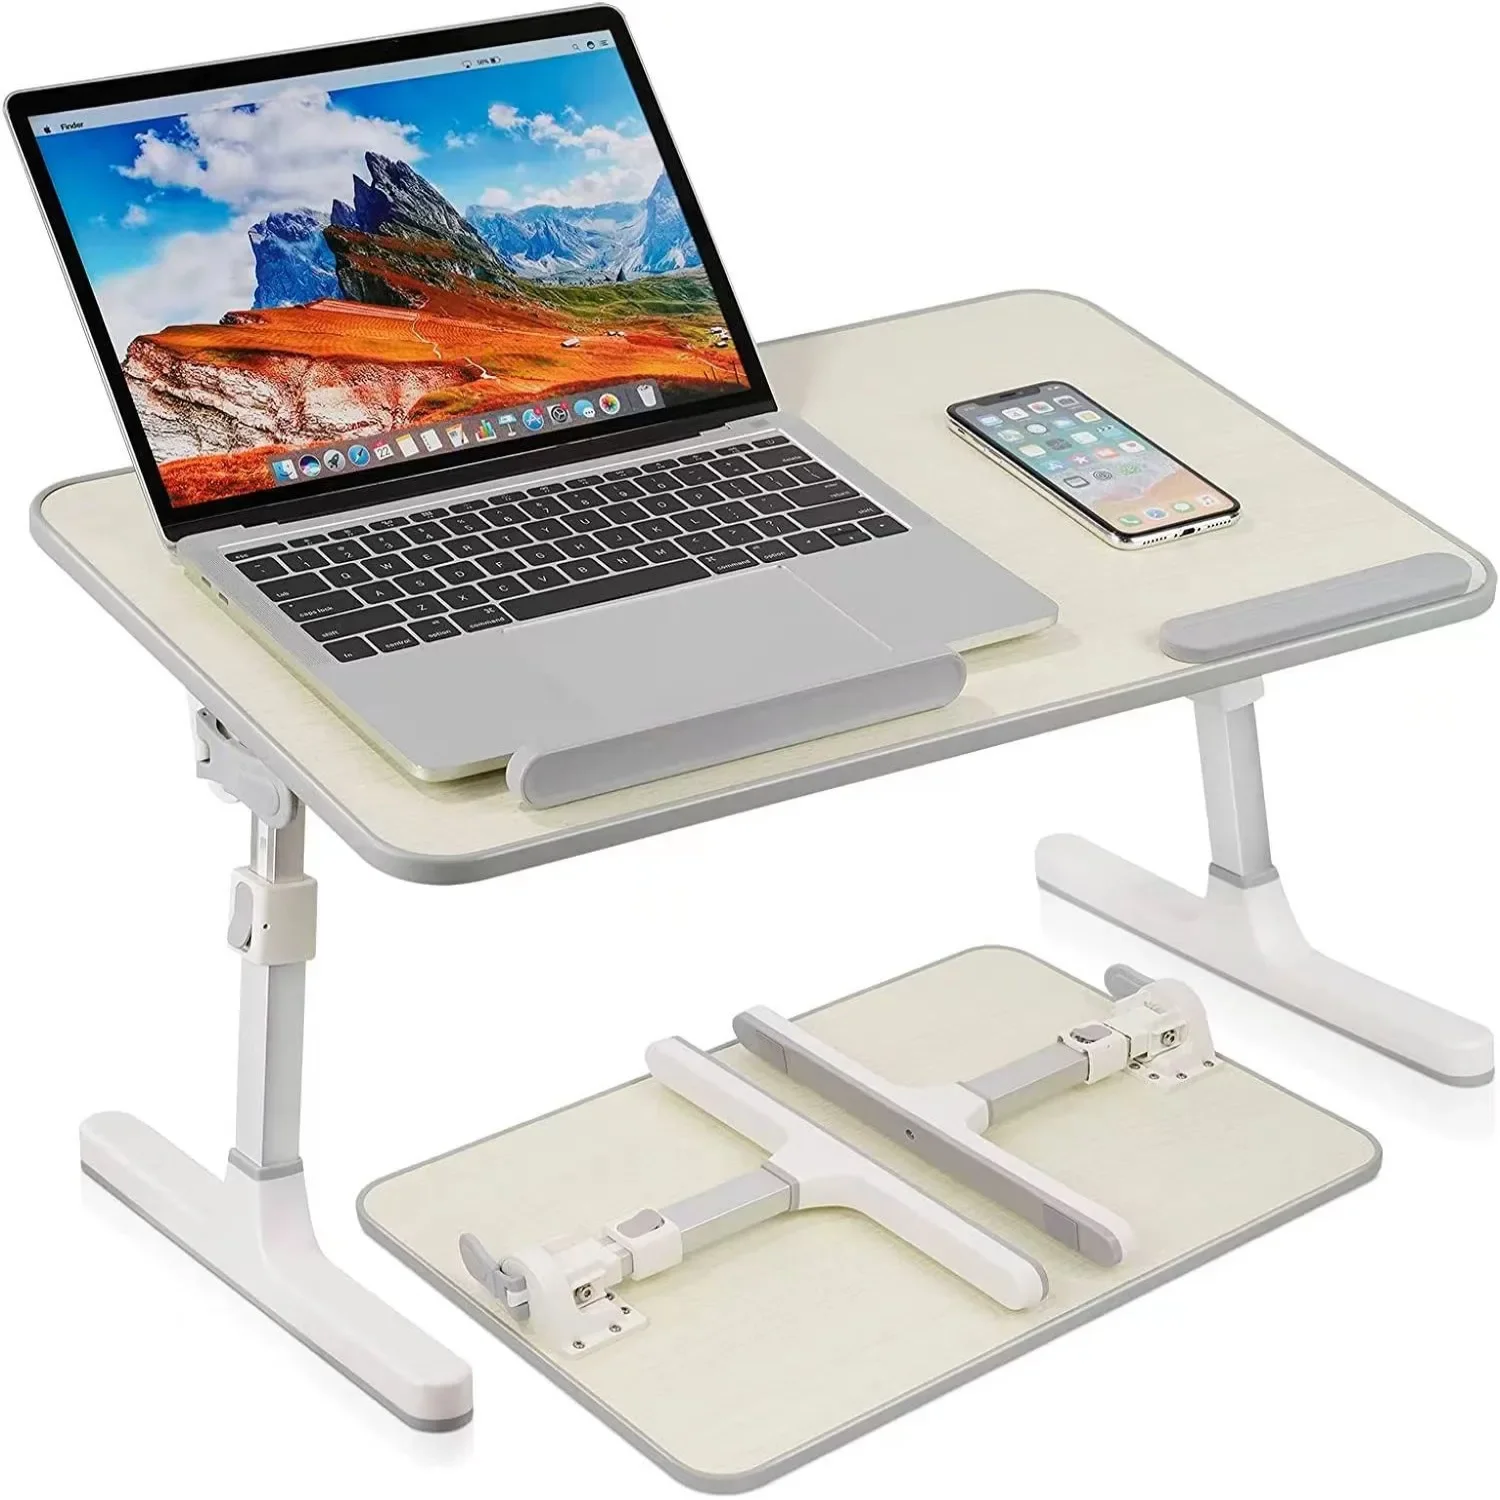 Foldable Lazy Laptop Table Bed Small Table Livable Laptop Computer Table Dormitory Desk Student Writing Table